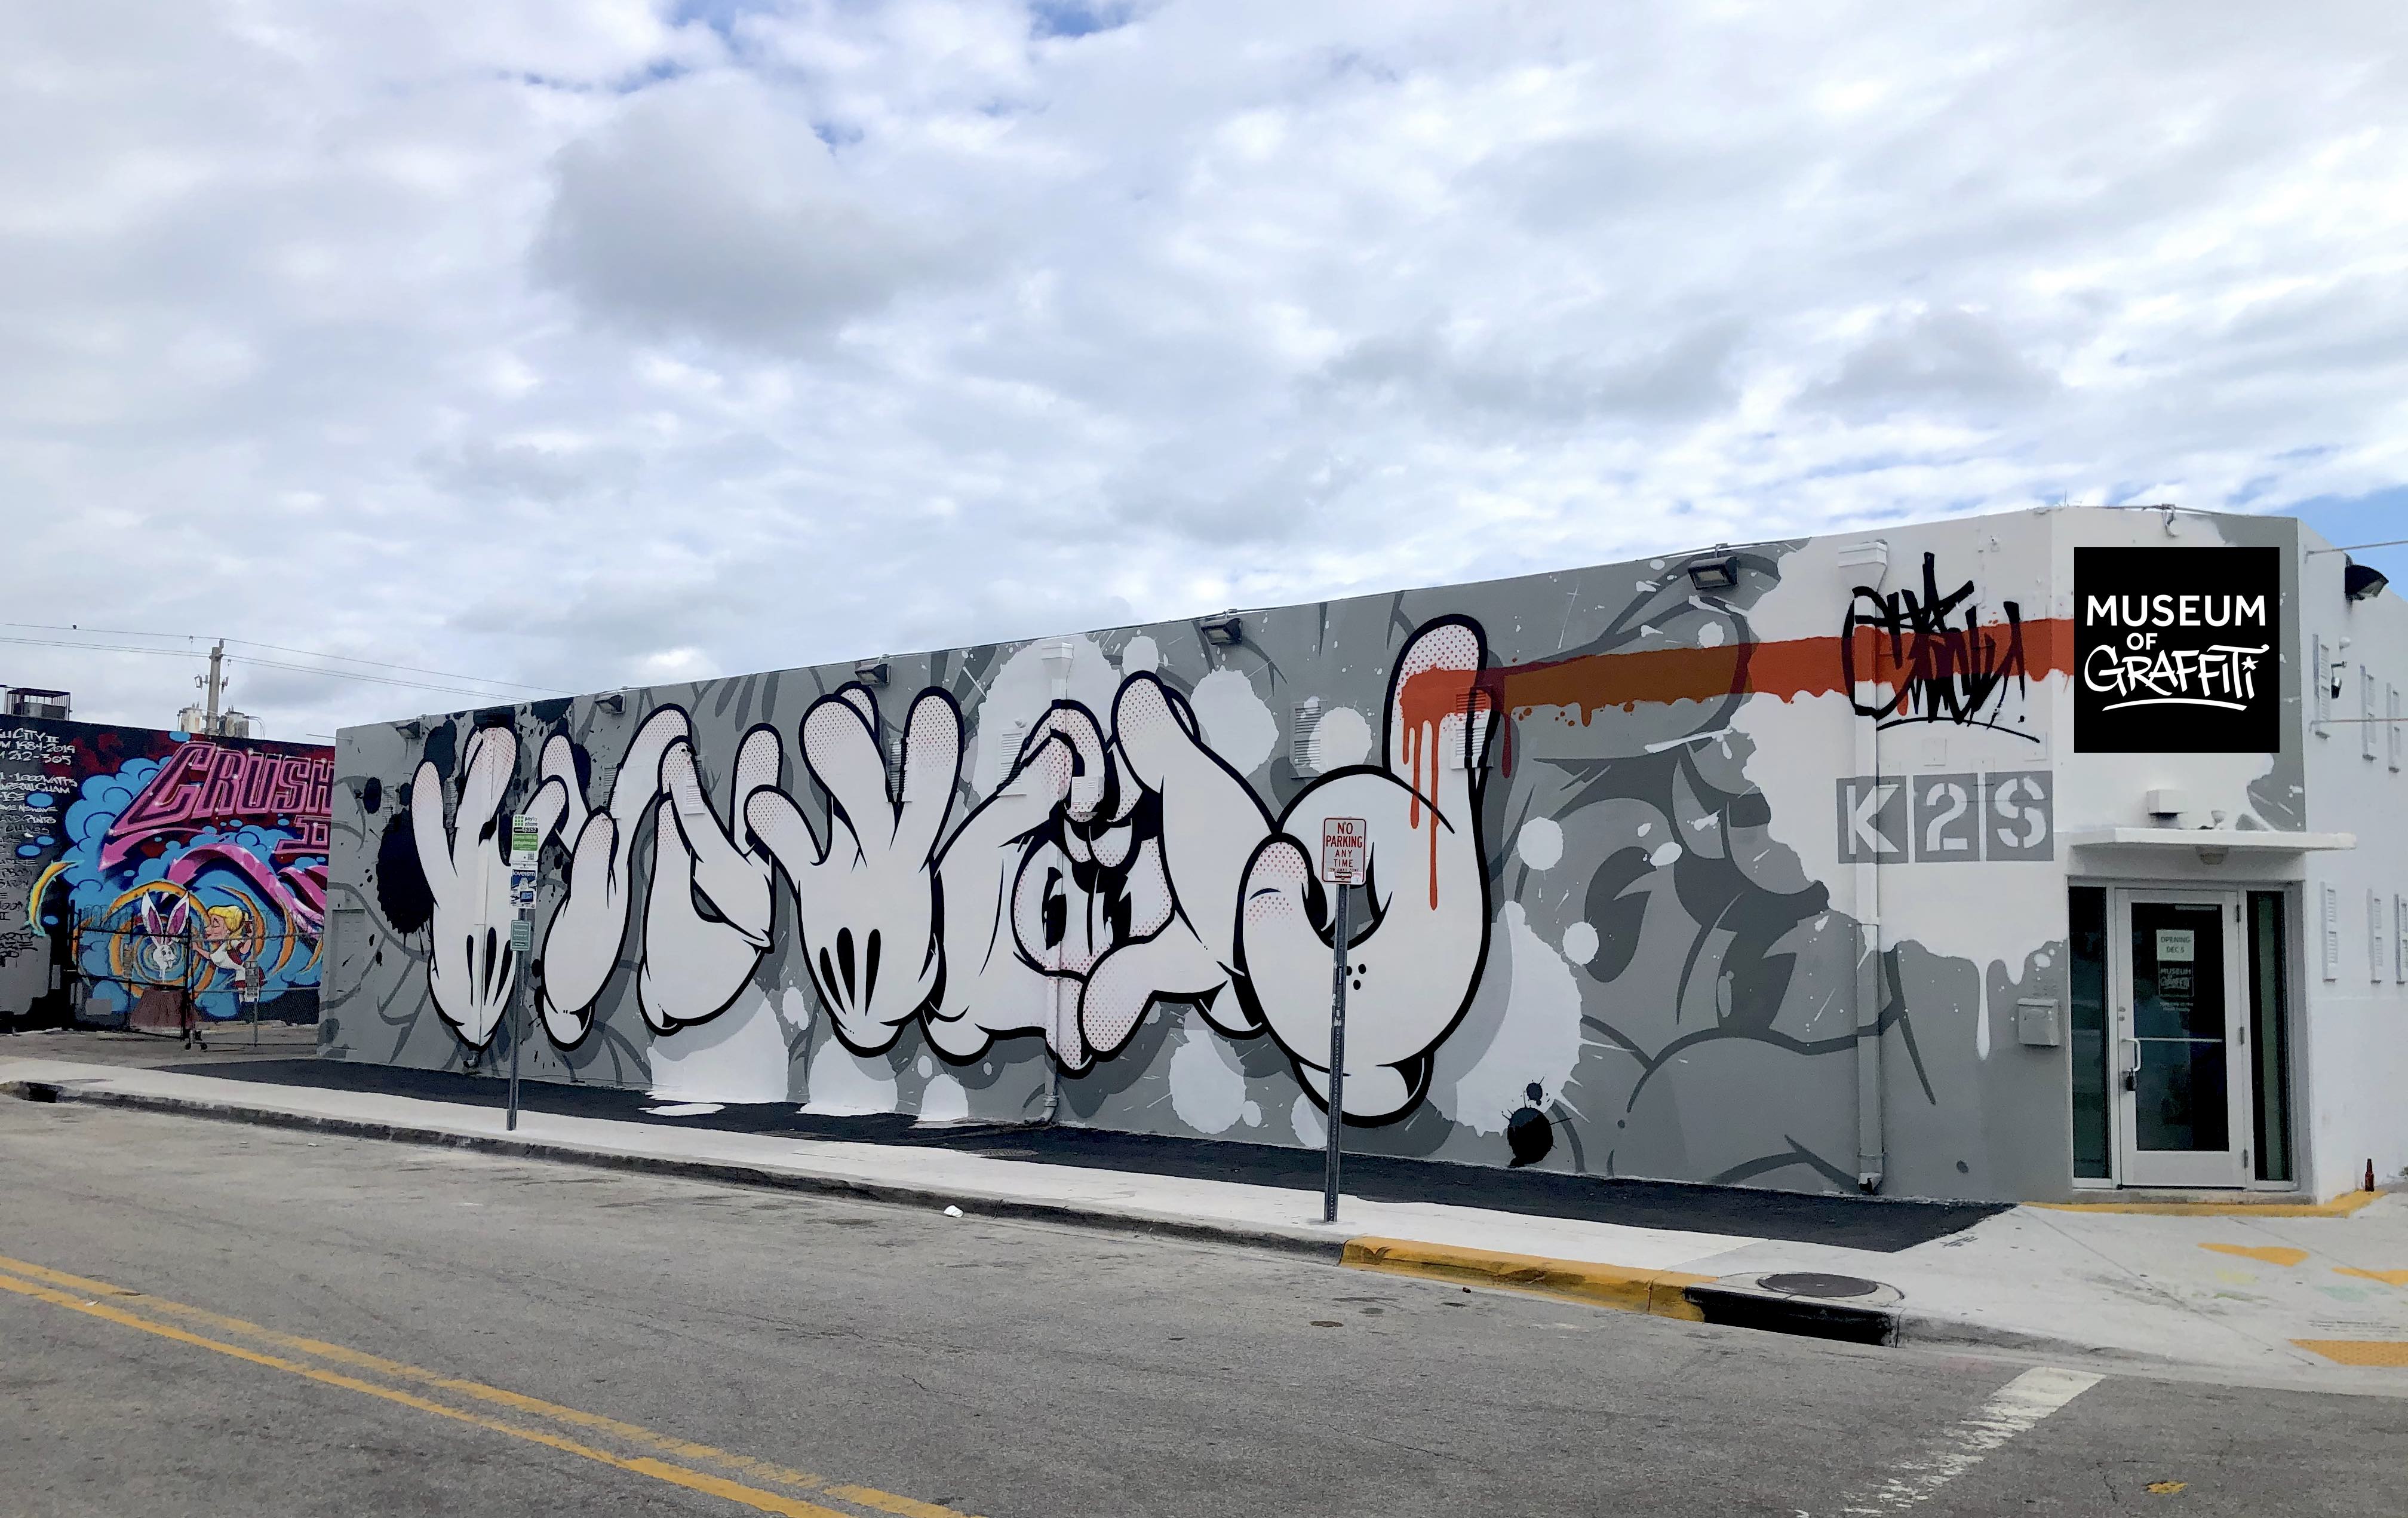 Miami S New Graffiti Museum Is Making The Case That The Outlaw Art Form Deserves A Respectable Home Artnet News